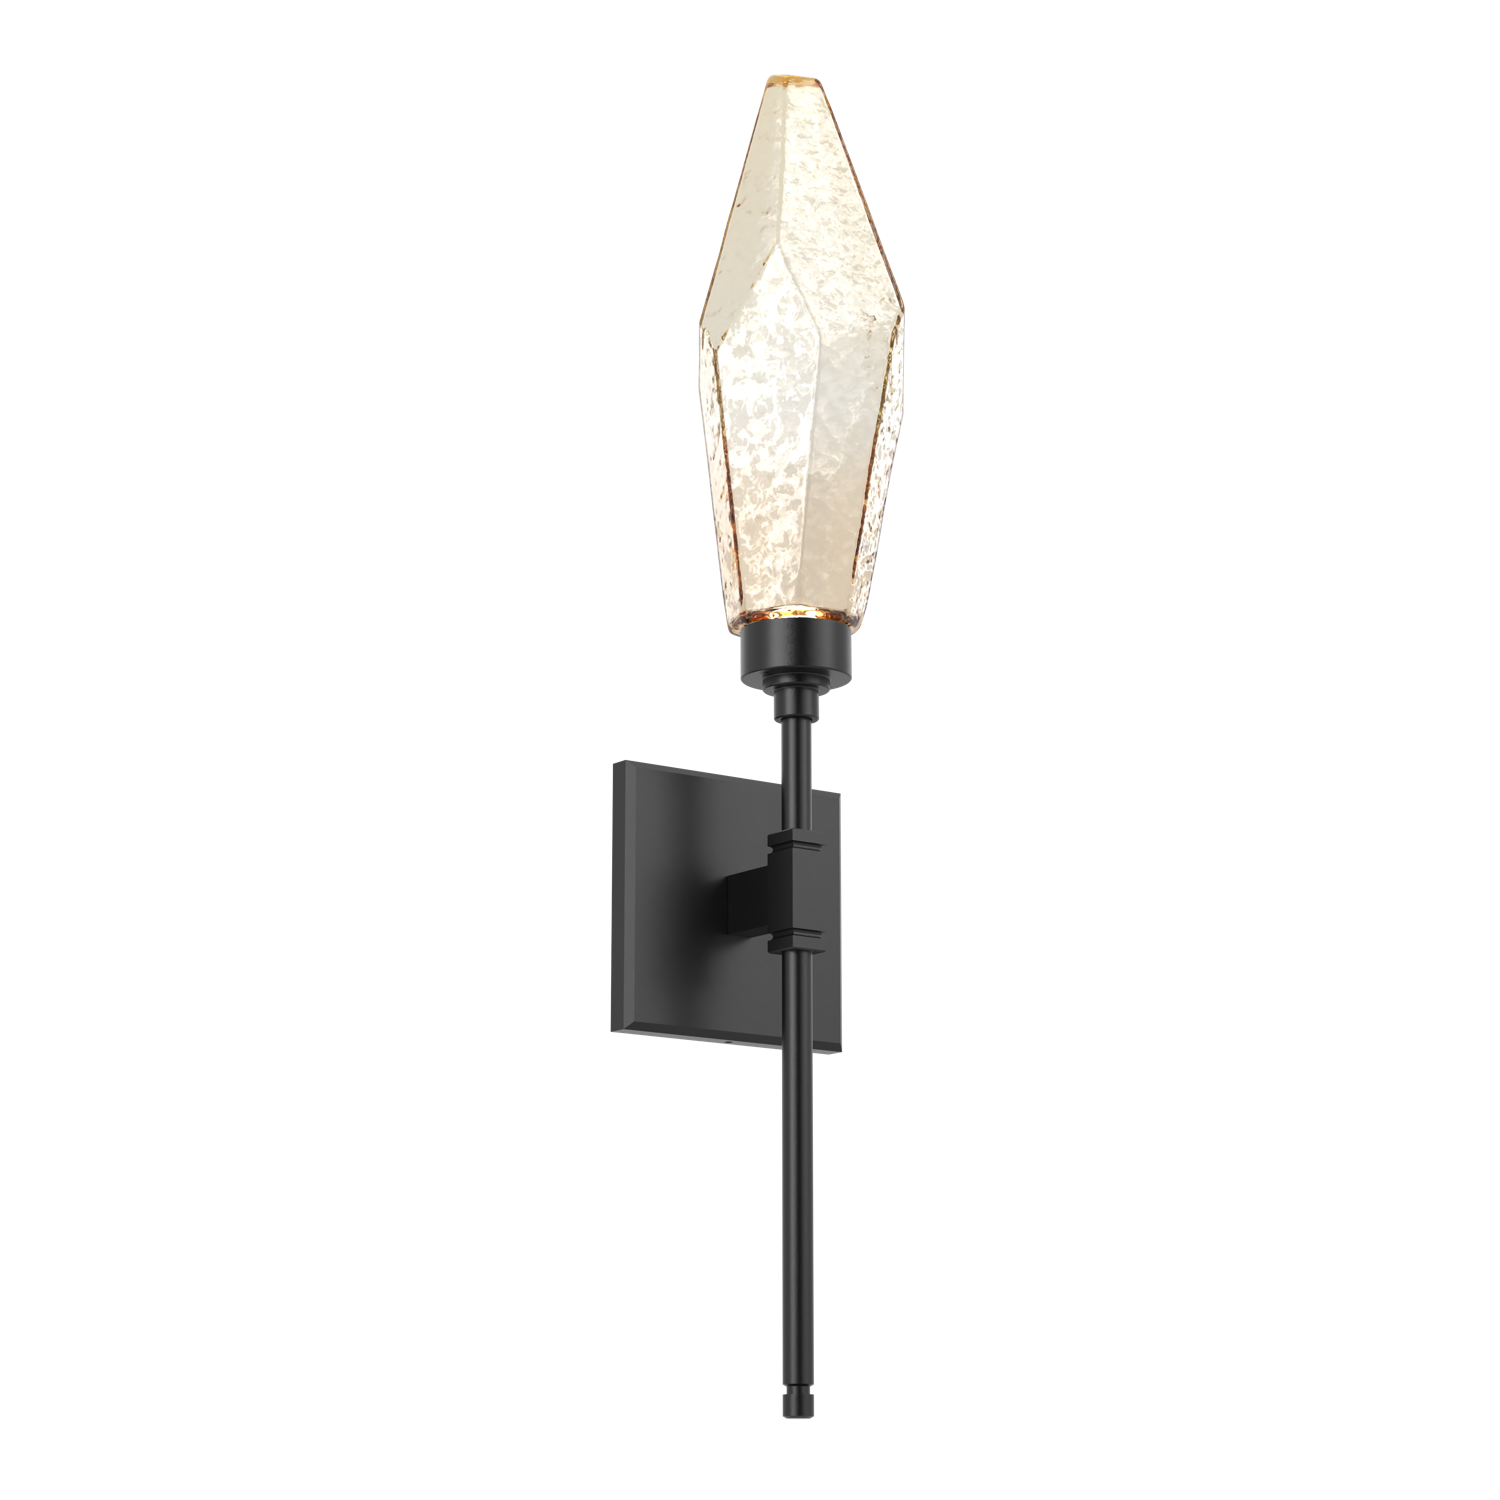 IDB0050-04-MB-CA-Hammerton-Studio-Rock-Crystal-ada-certified-belvedere-wall-sconce-with-matte-black-finish-and-chilled-amber-blown-glass-shades-and-LED-lamping